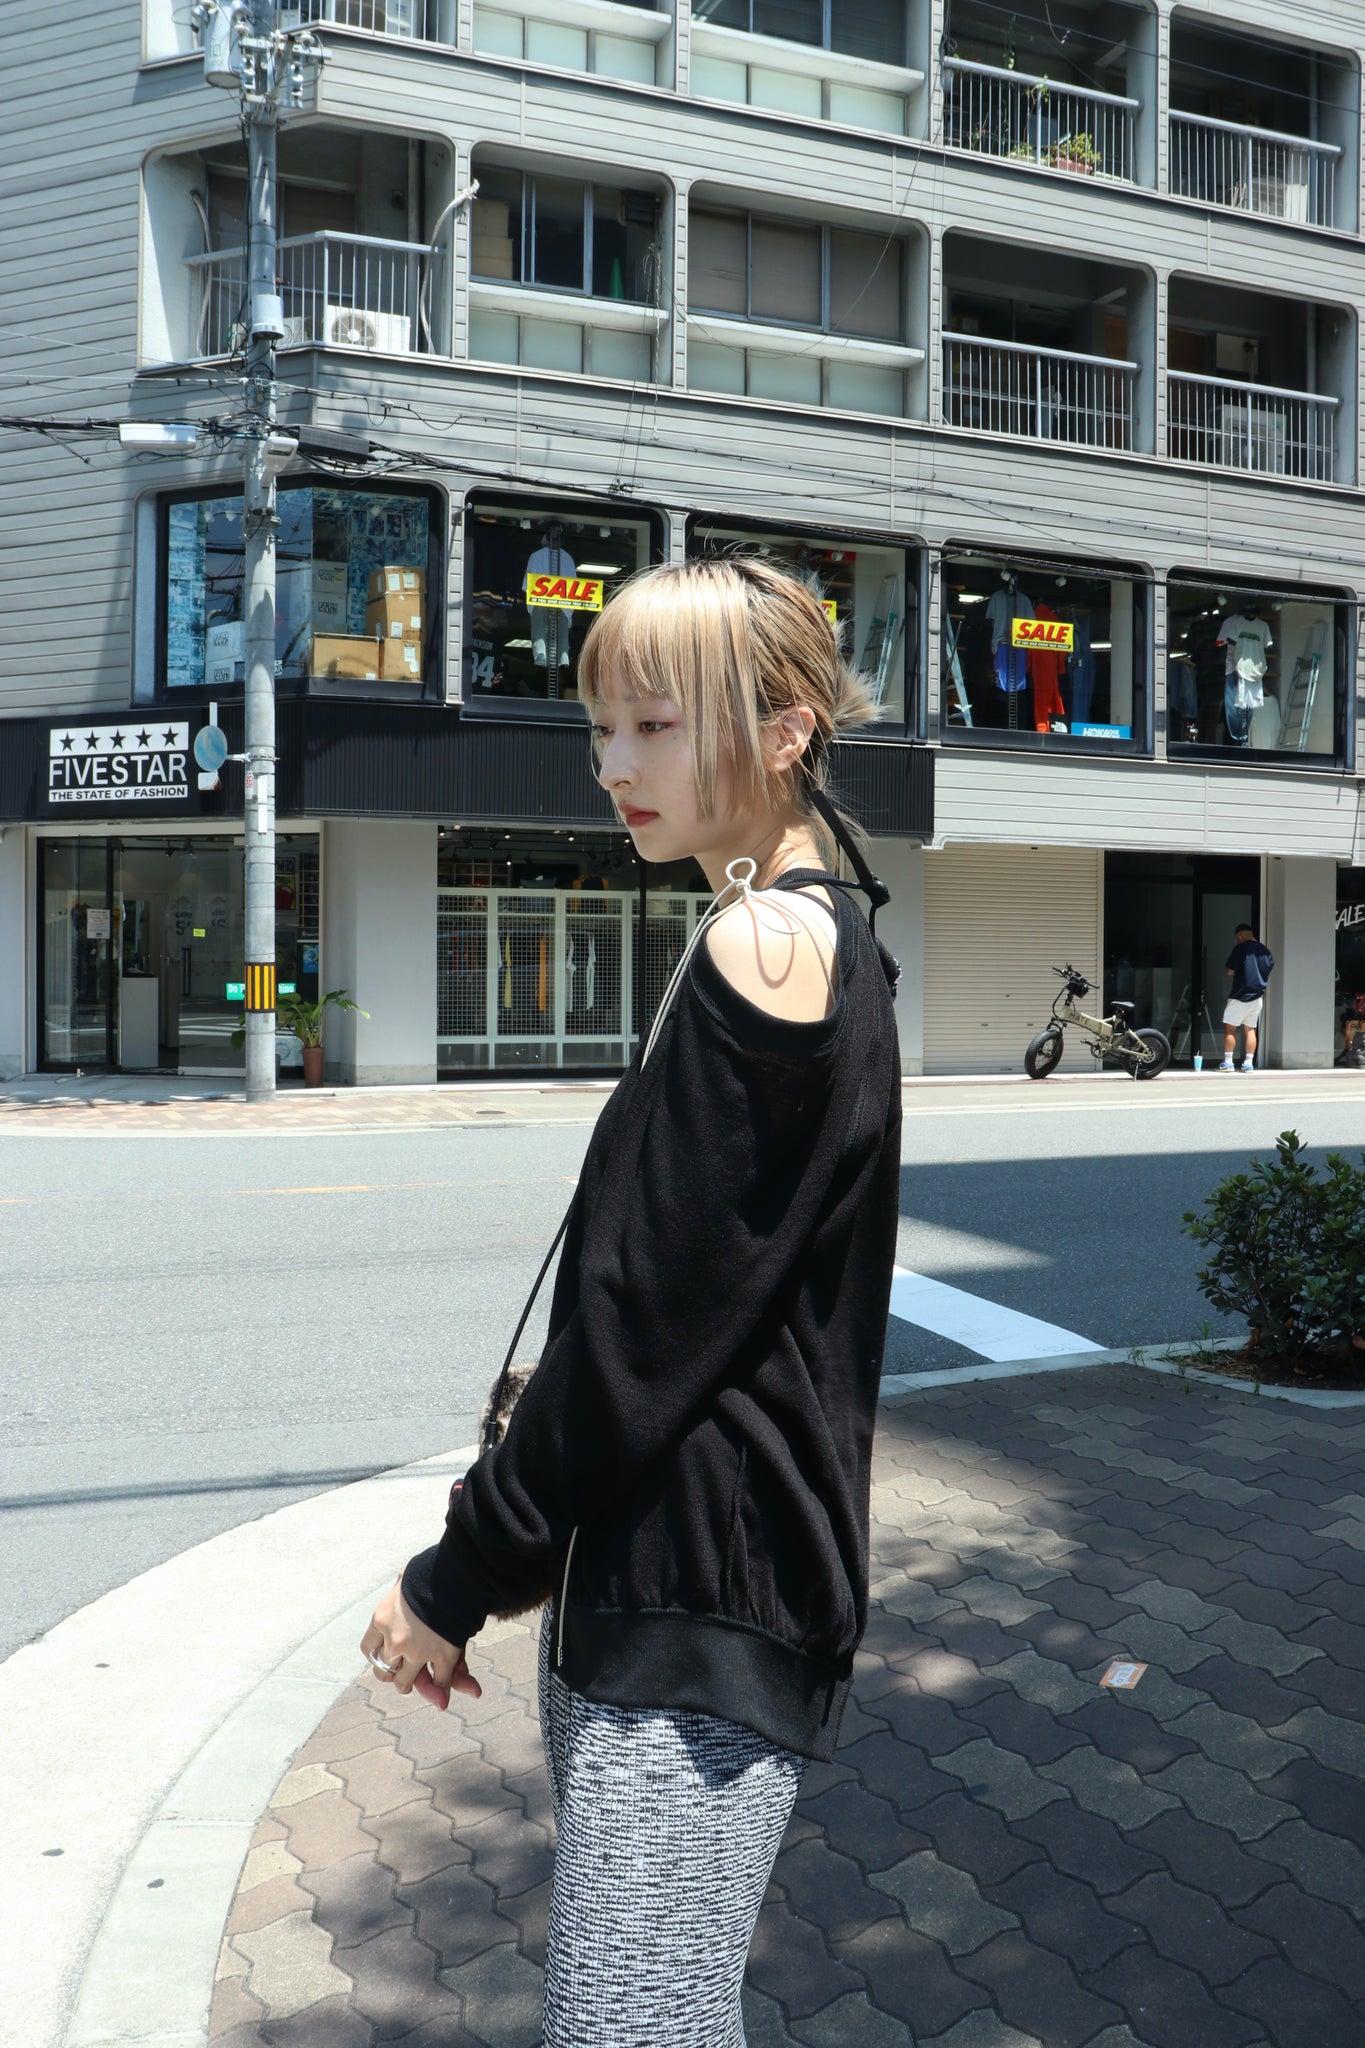 PerverZe's 22AW Asymmetric Jersey Top BLK and SODUK's 22AW Slit Knit Trousers MIX MIX and TIIT 20SS Rib Tank Top WHT 36 and Masu's 22AW NIBBLED NECKLACE S S. NOA SLVR of 22AW of LVR and Rathel 45 and SOE 21AW's 21AW FUR SQUARE POUCH 5 BRW worn image